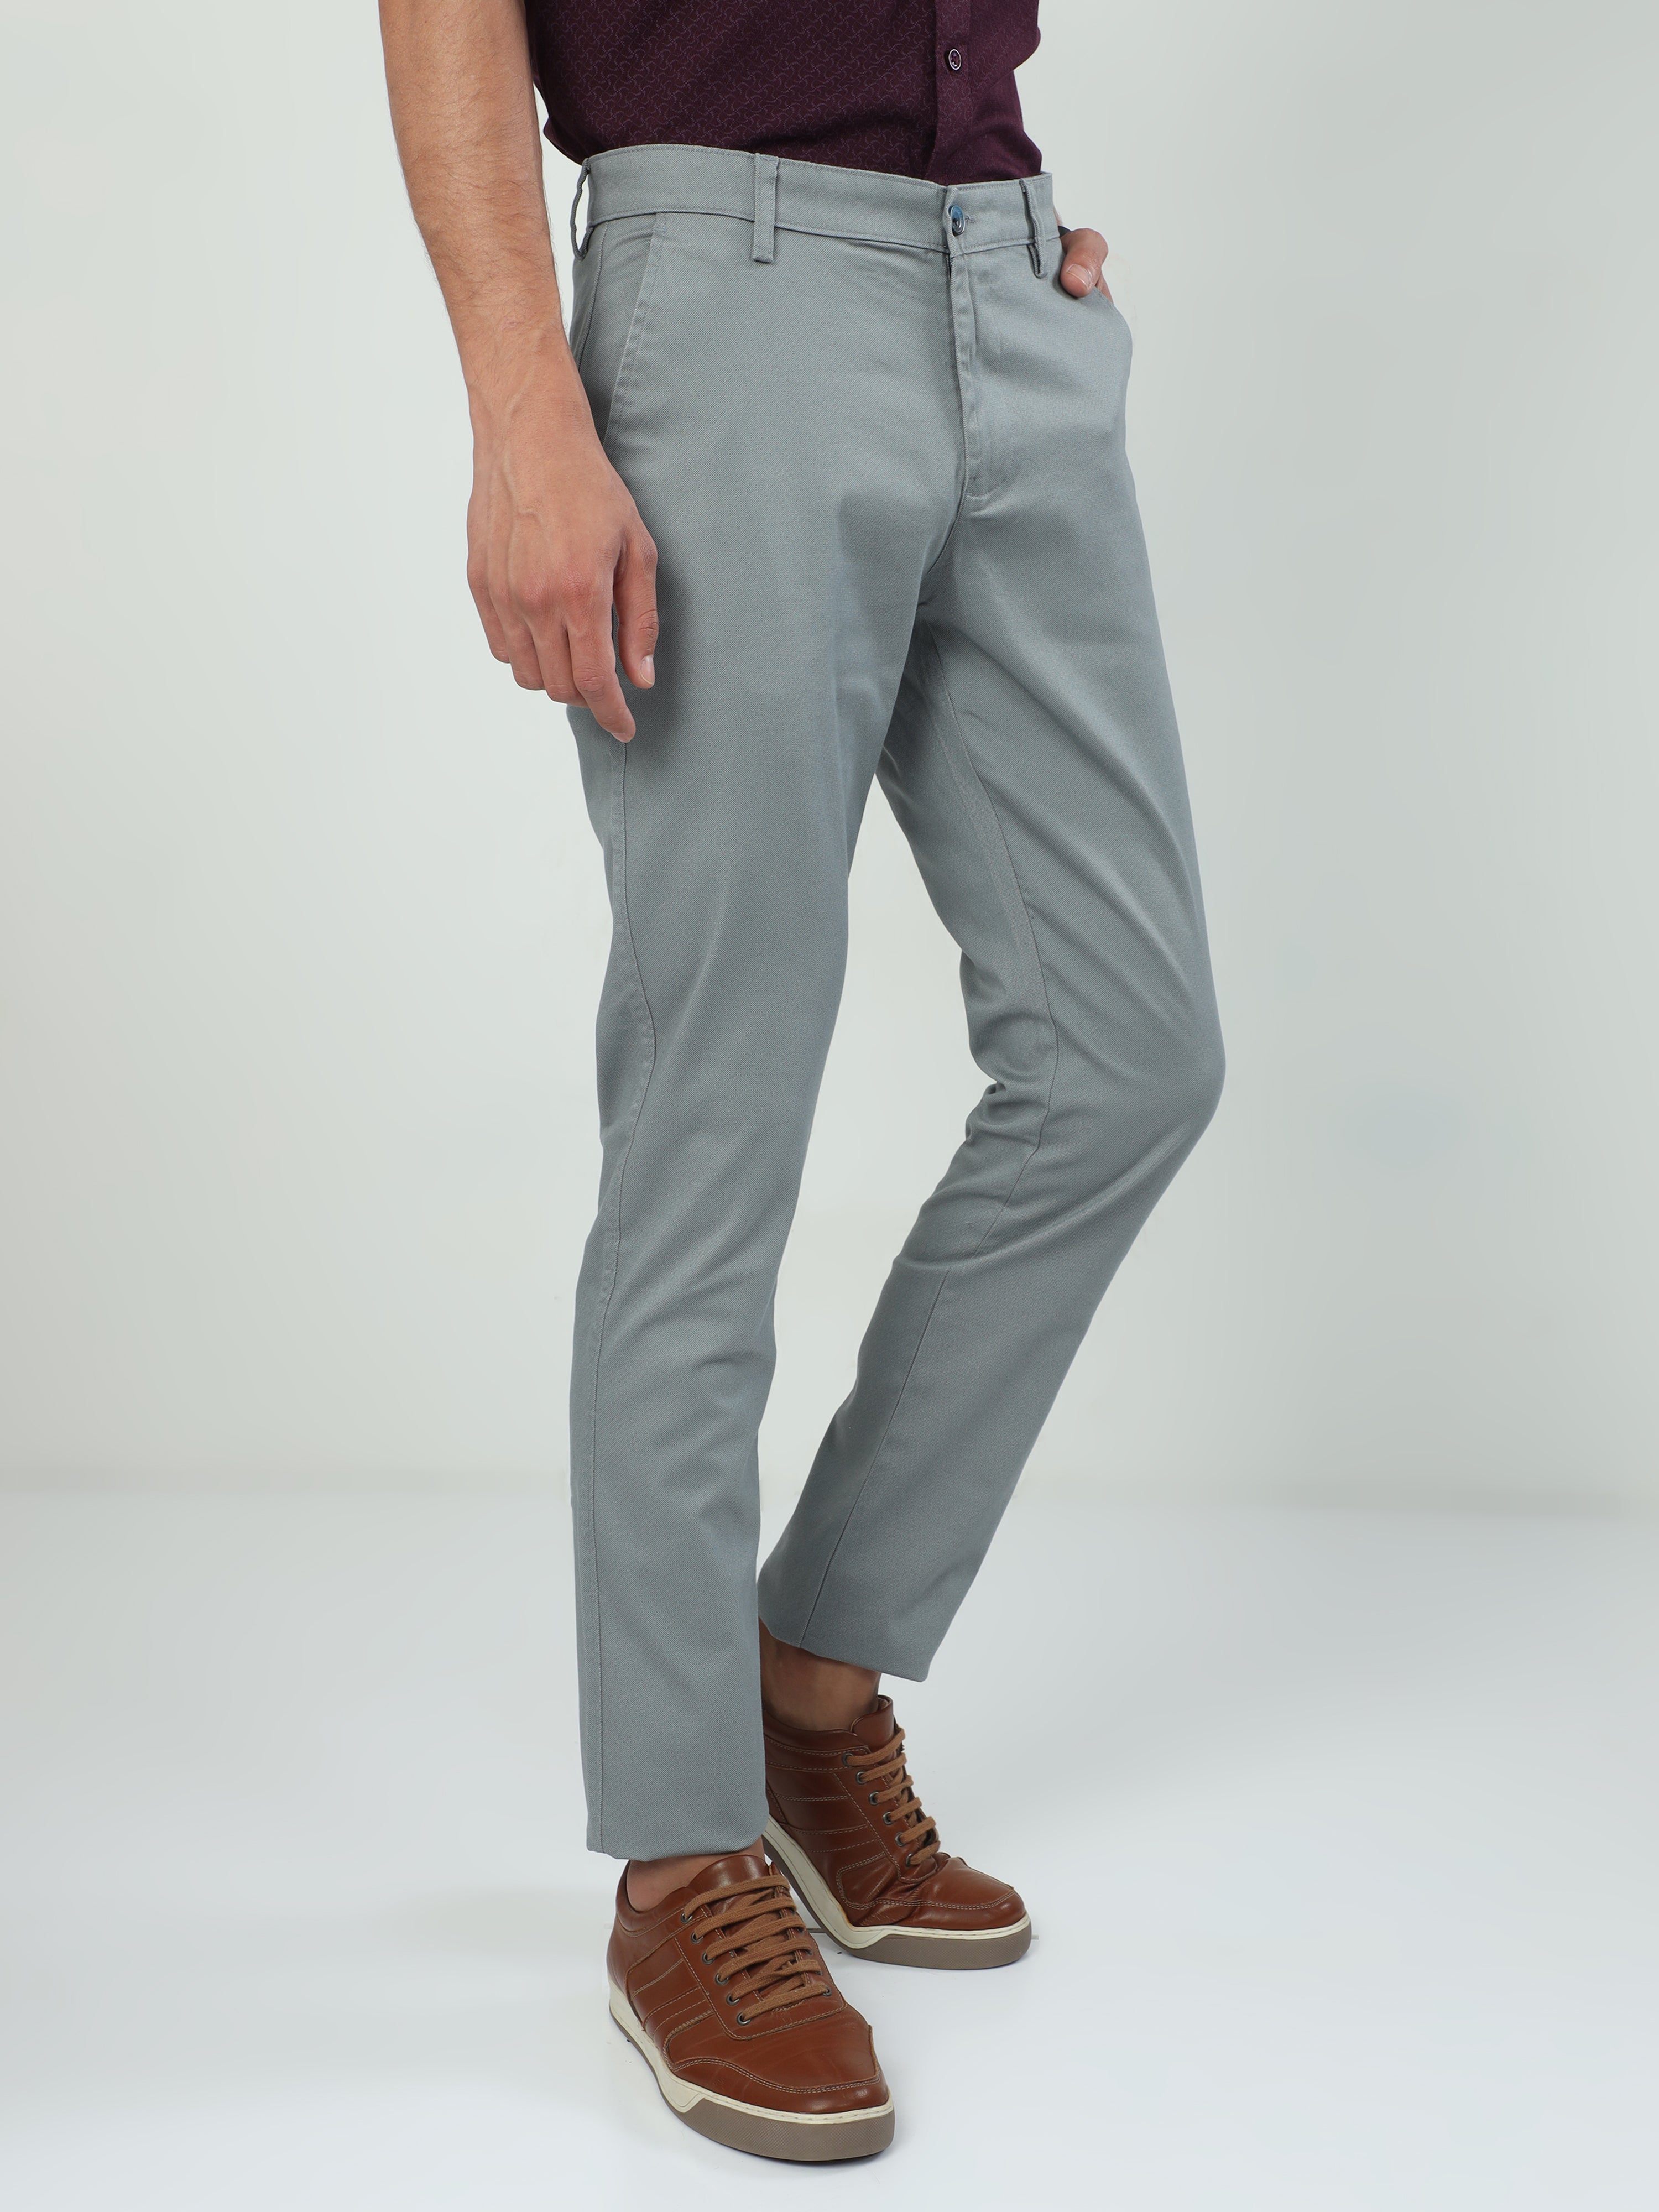 Classic Polo Men's   Moderate Fit Cotton Trousers | TO2-21 E-BLU-MF-LY